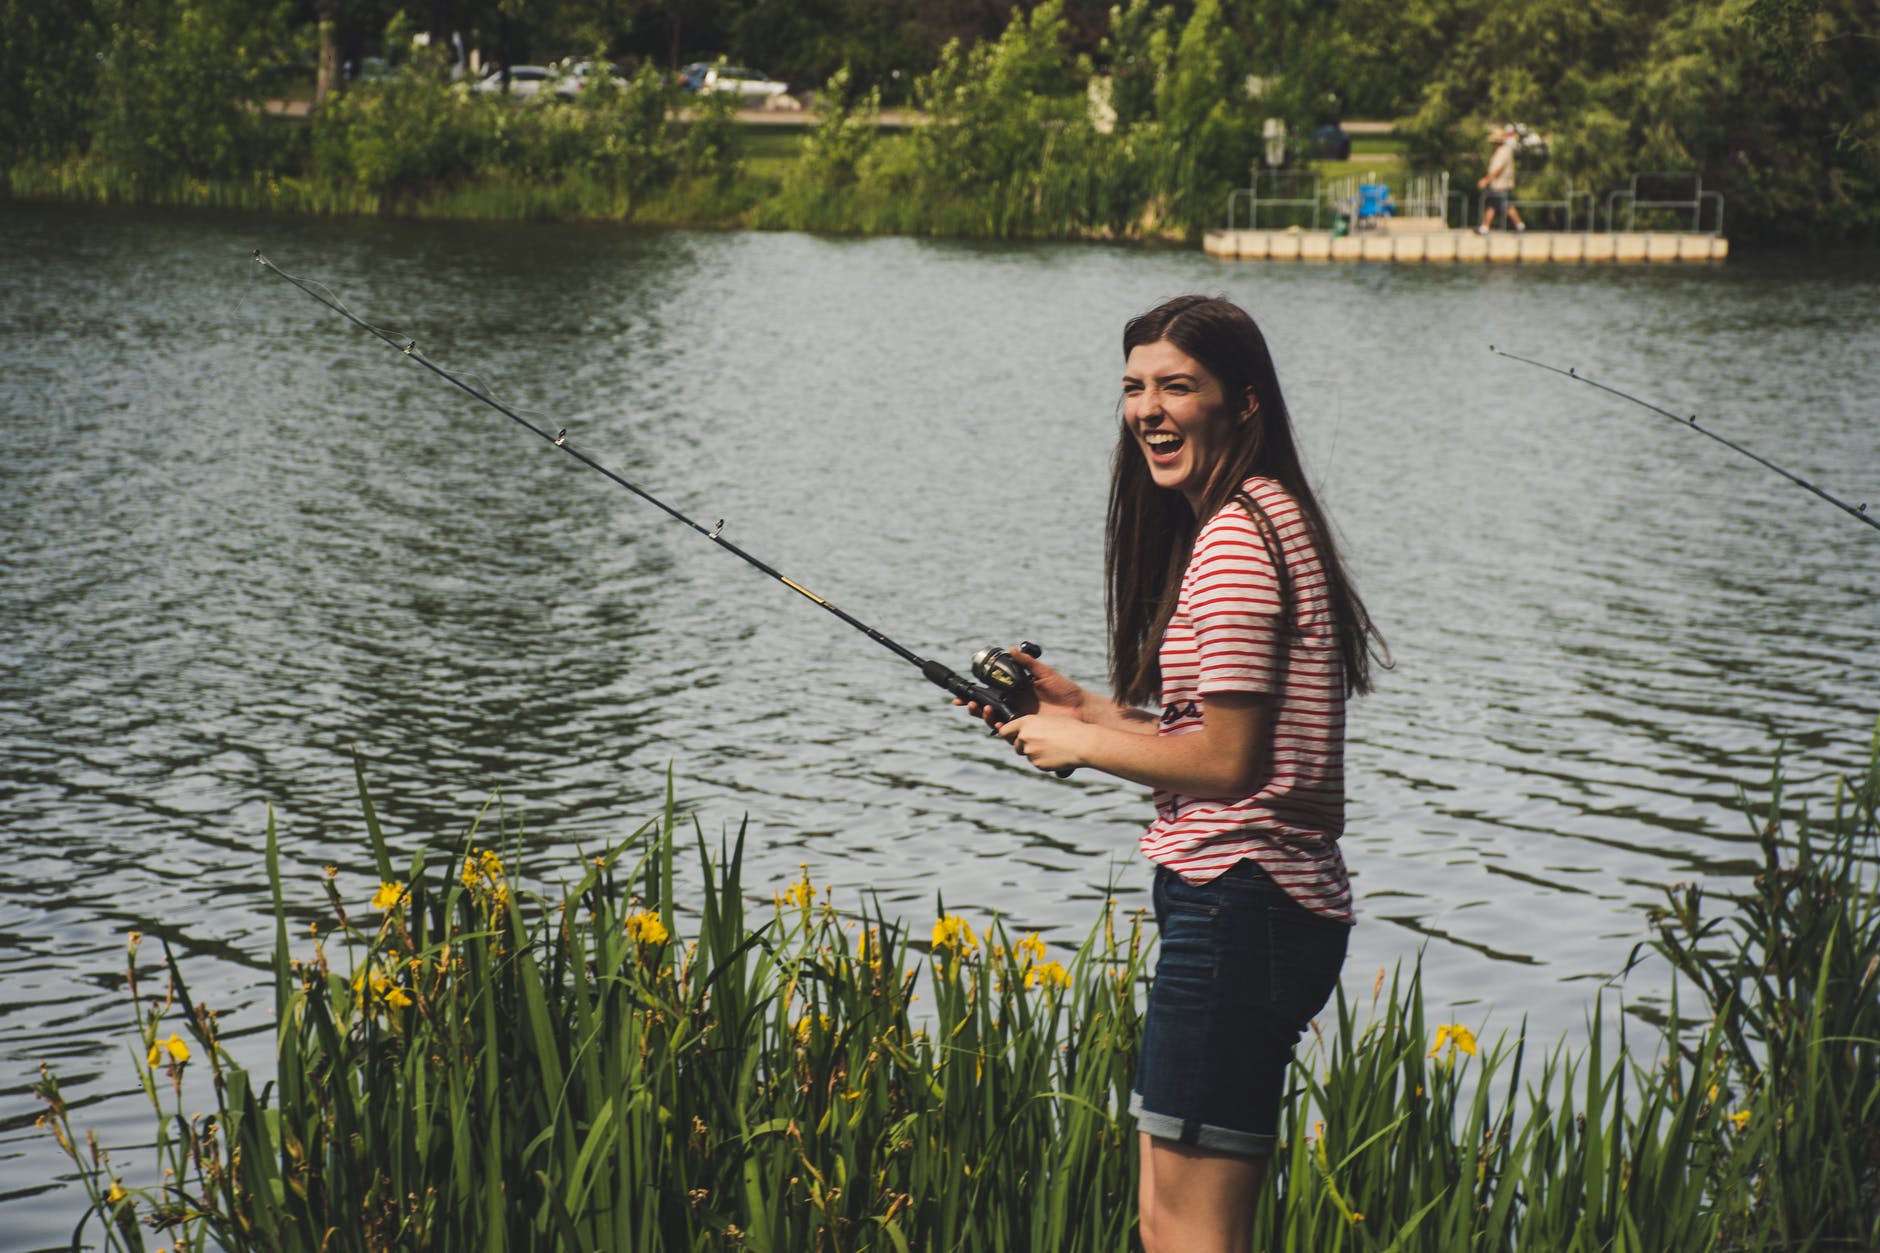 woman in red striped shirt and blue denim shorts holding fishing rod